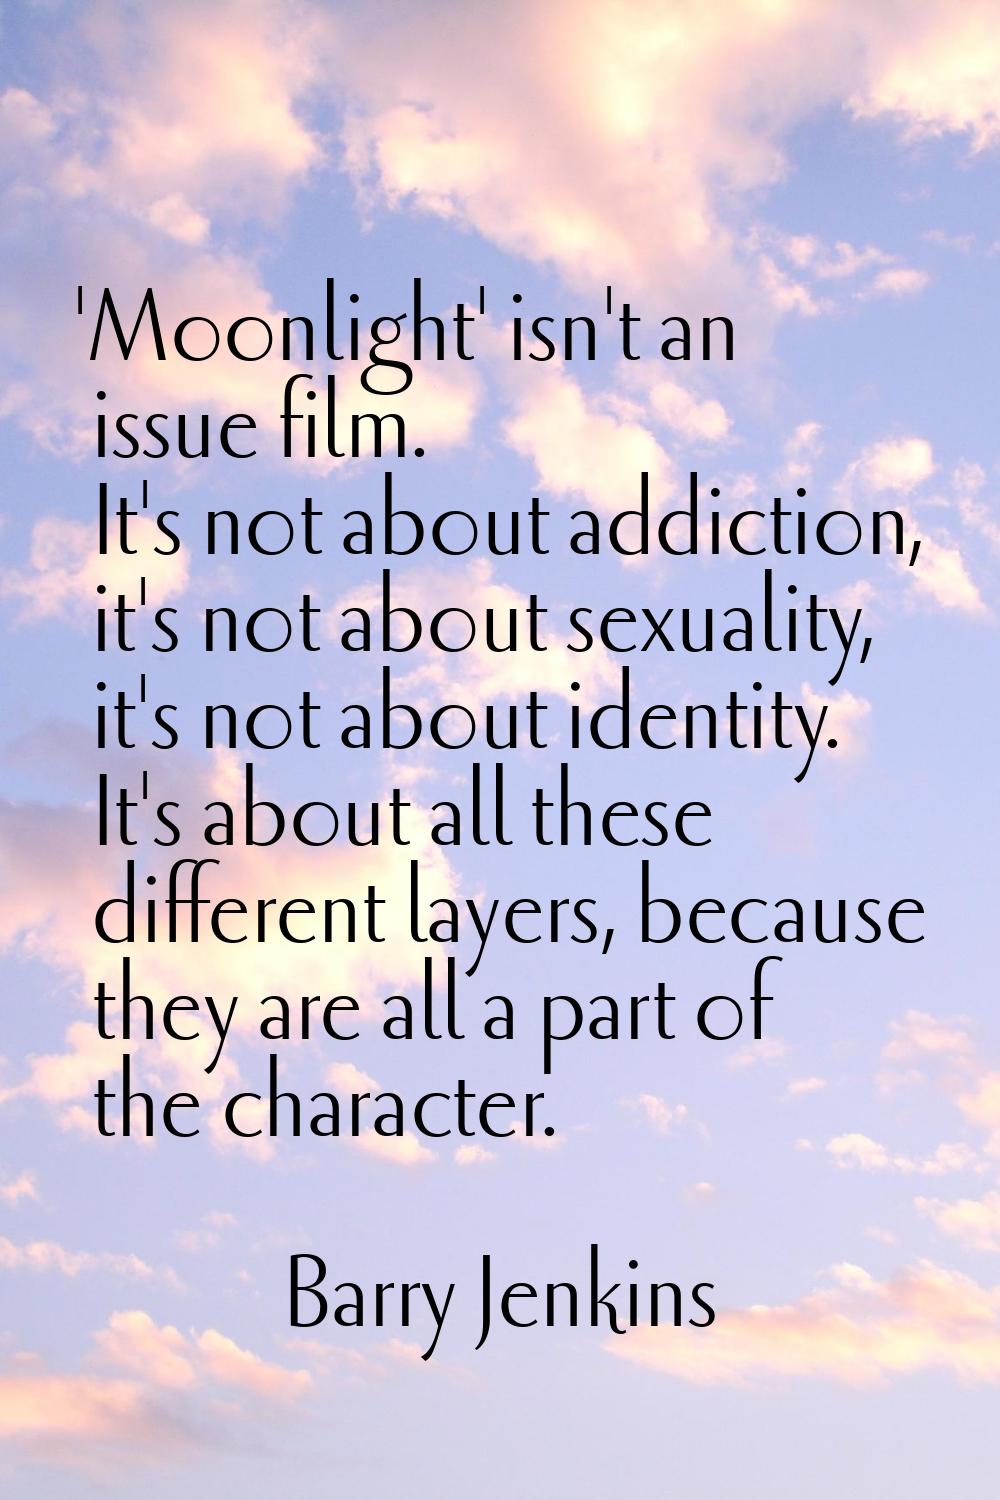 'Moonlight' isn't an issue film. It's not about addiction, it's not about sexuality, it's not about